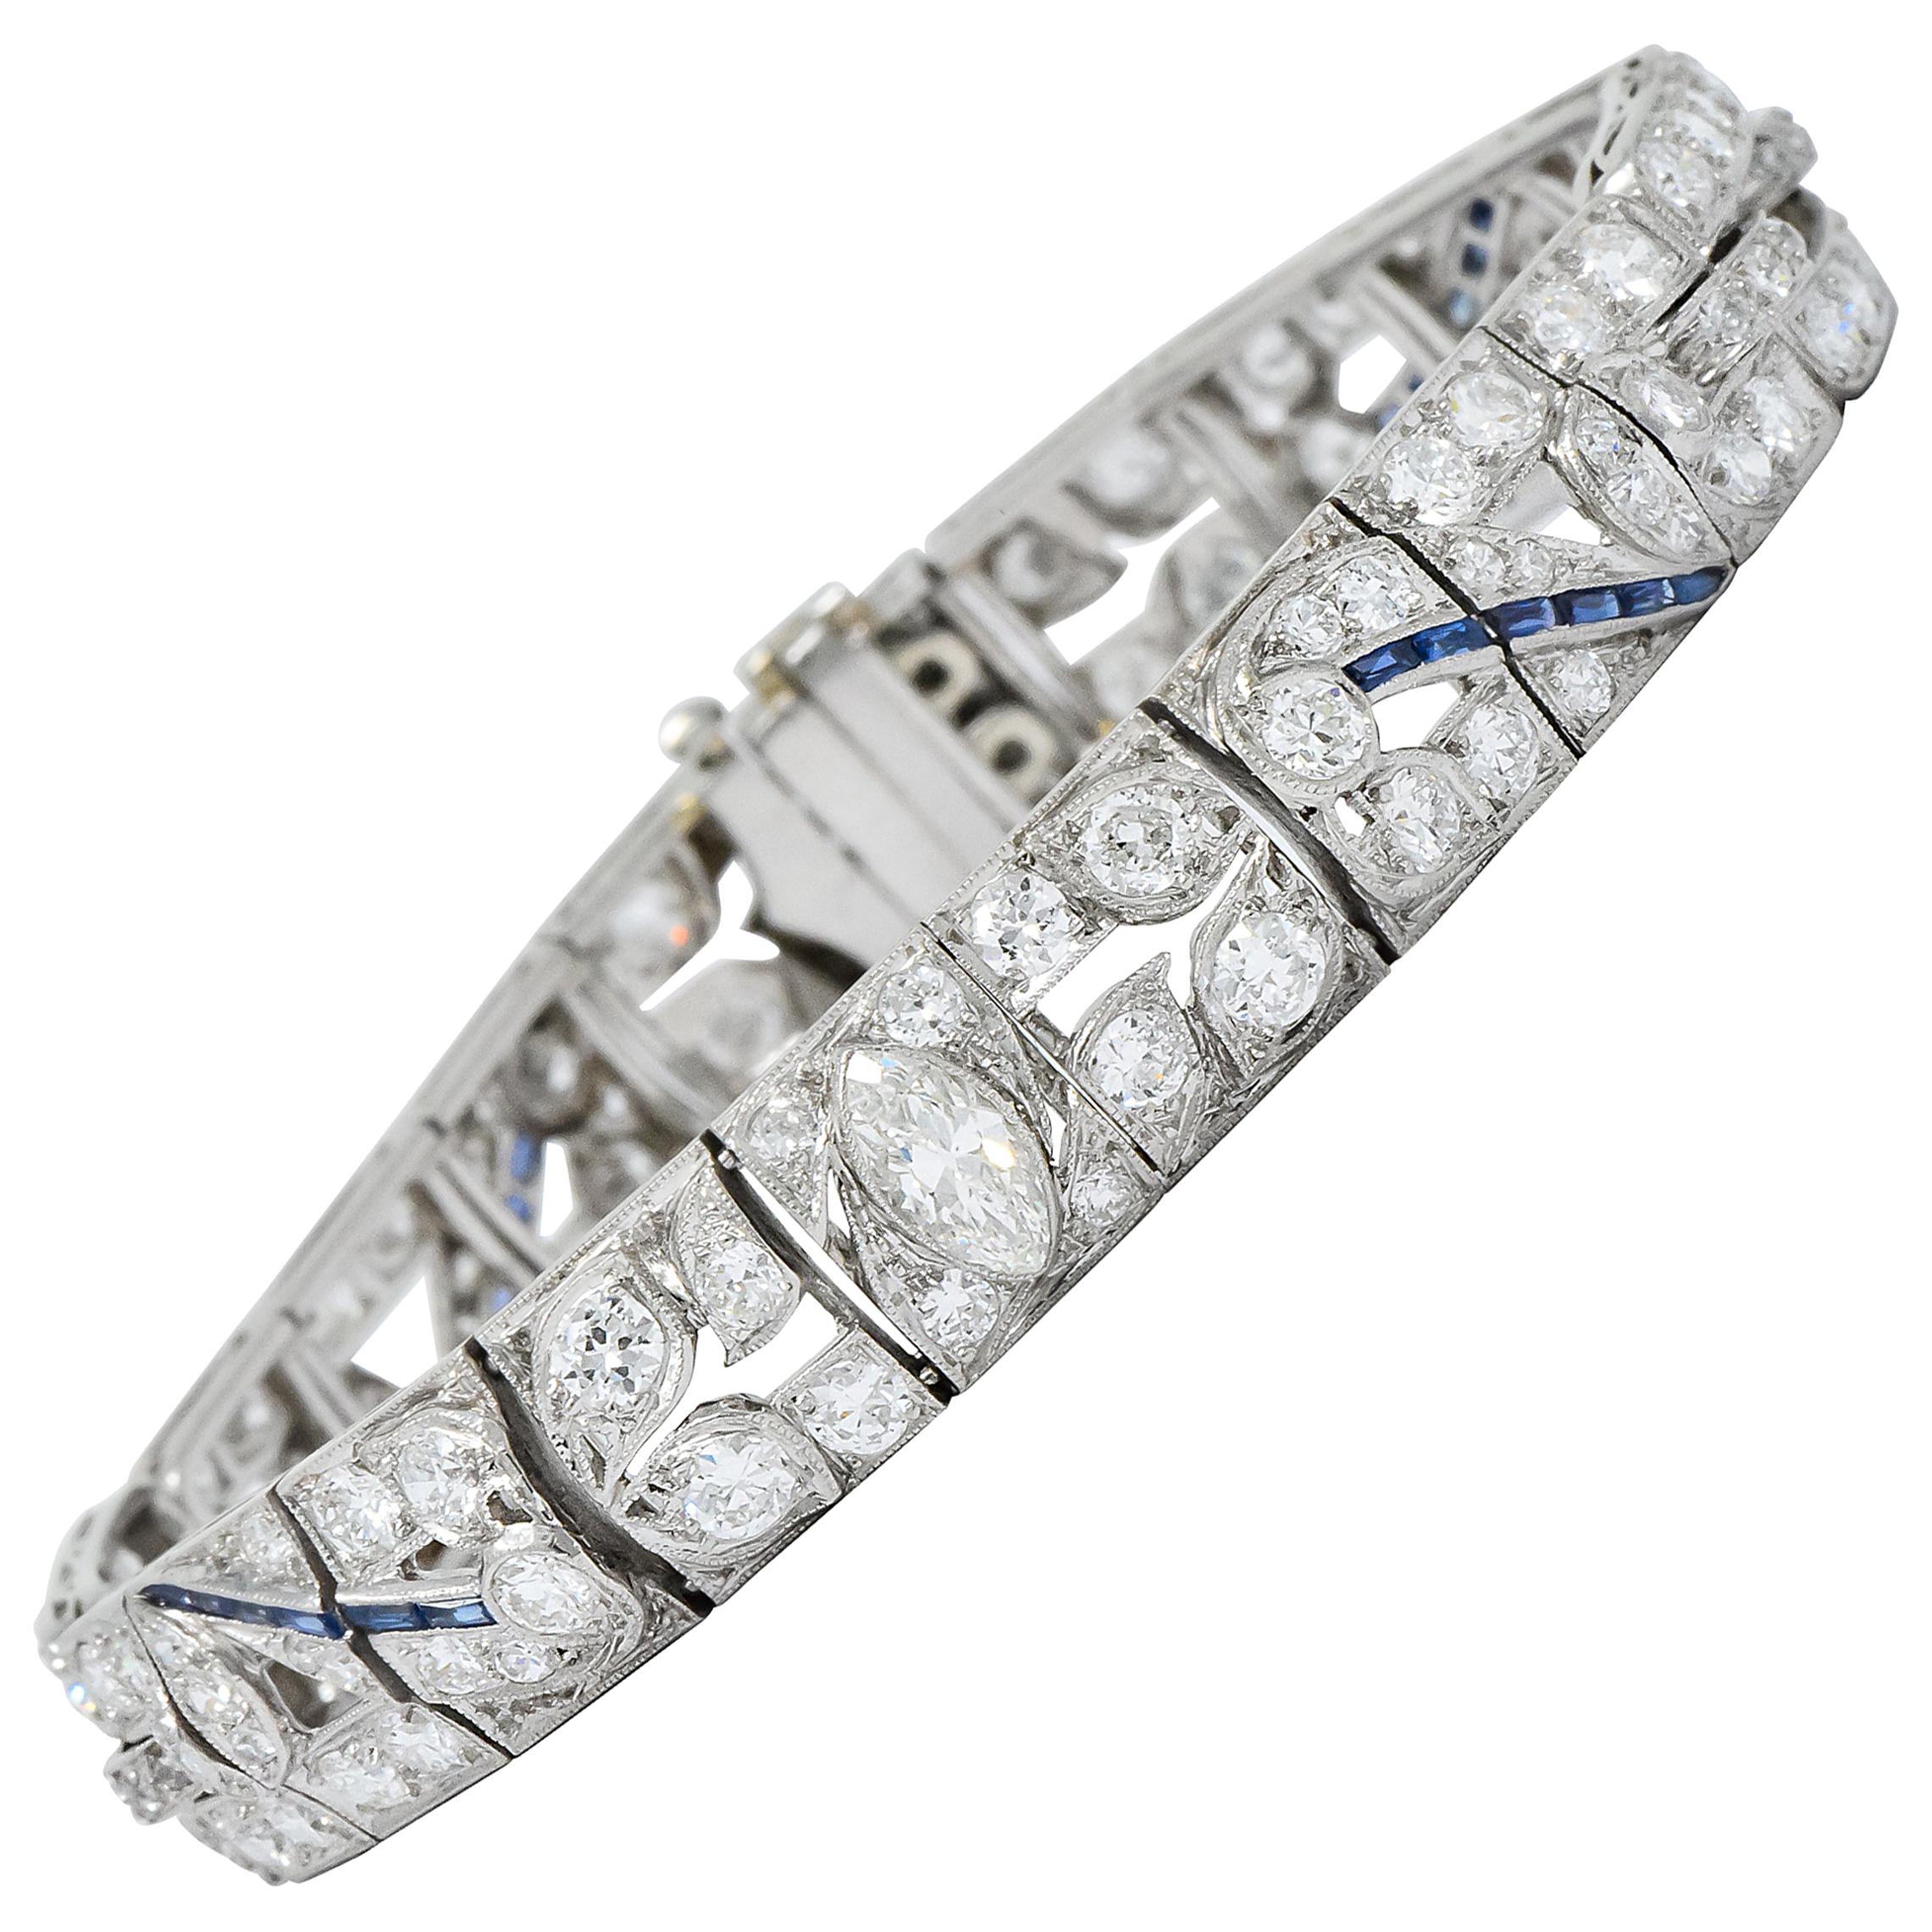 Link bracelet is designed with a pierced and scrolling floral motif with decorative milgrain detail

Set throughout by round brilliant and single cut diamonds weighing in total approximately 9.06 carats total; G/H color with VS to SI